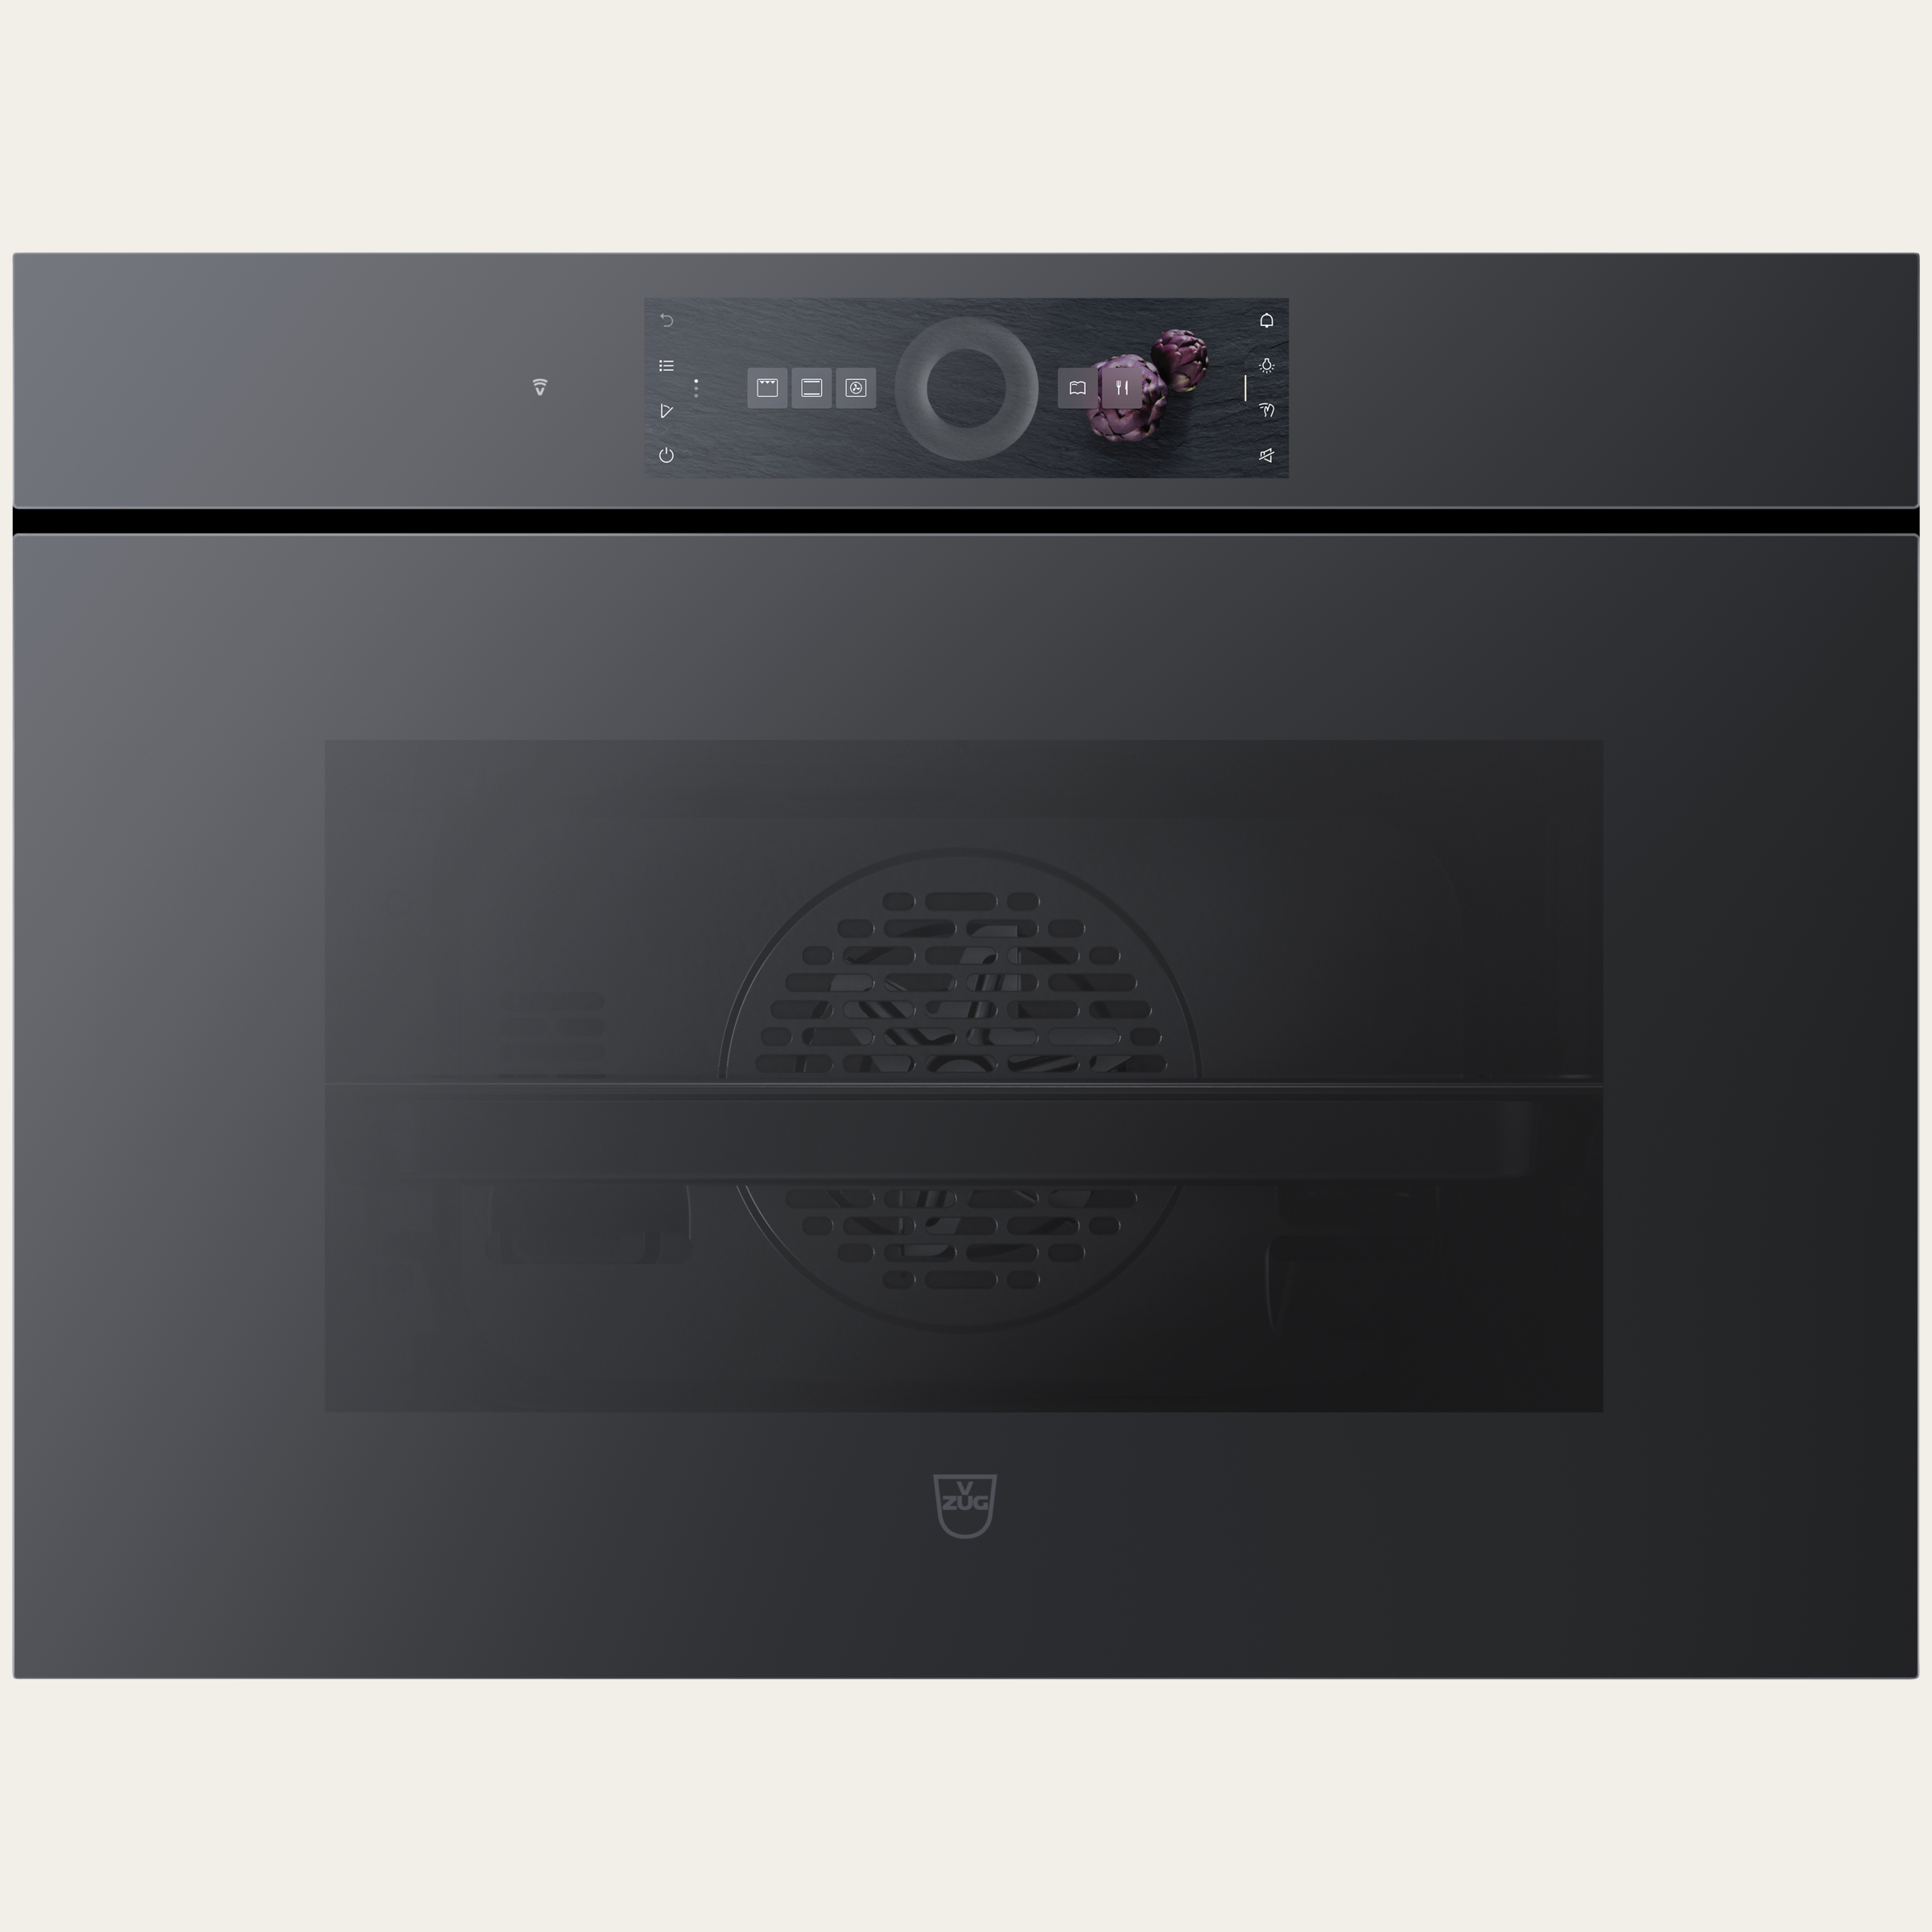 V-ZUG Oven Combair V6000 45, Standard width: 60 cm, Standard height: 45 cm, Black mirror glass, Handle: Handle-free, Touchscreen with CircleSlider, V-ZUG-Home, TopClean